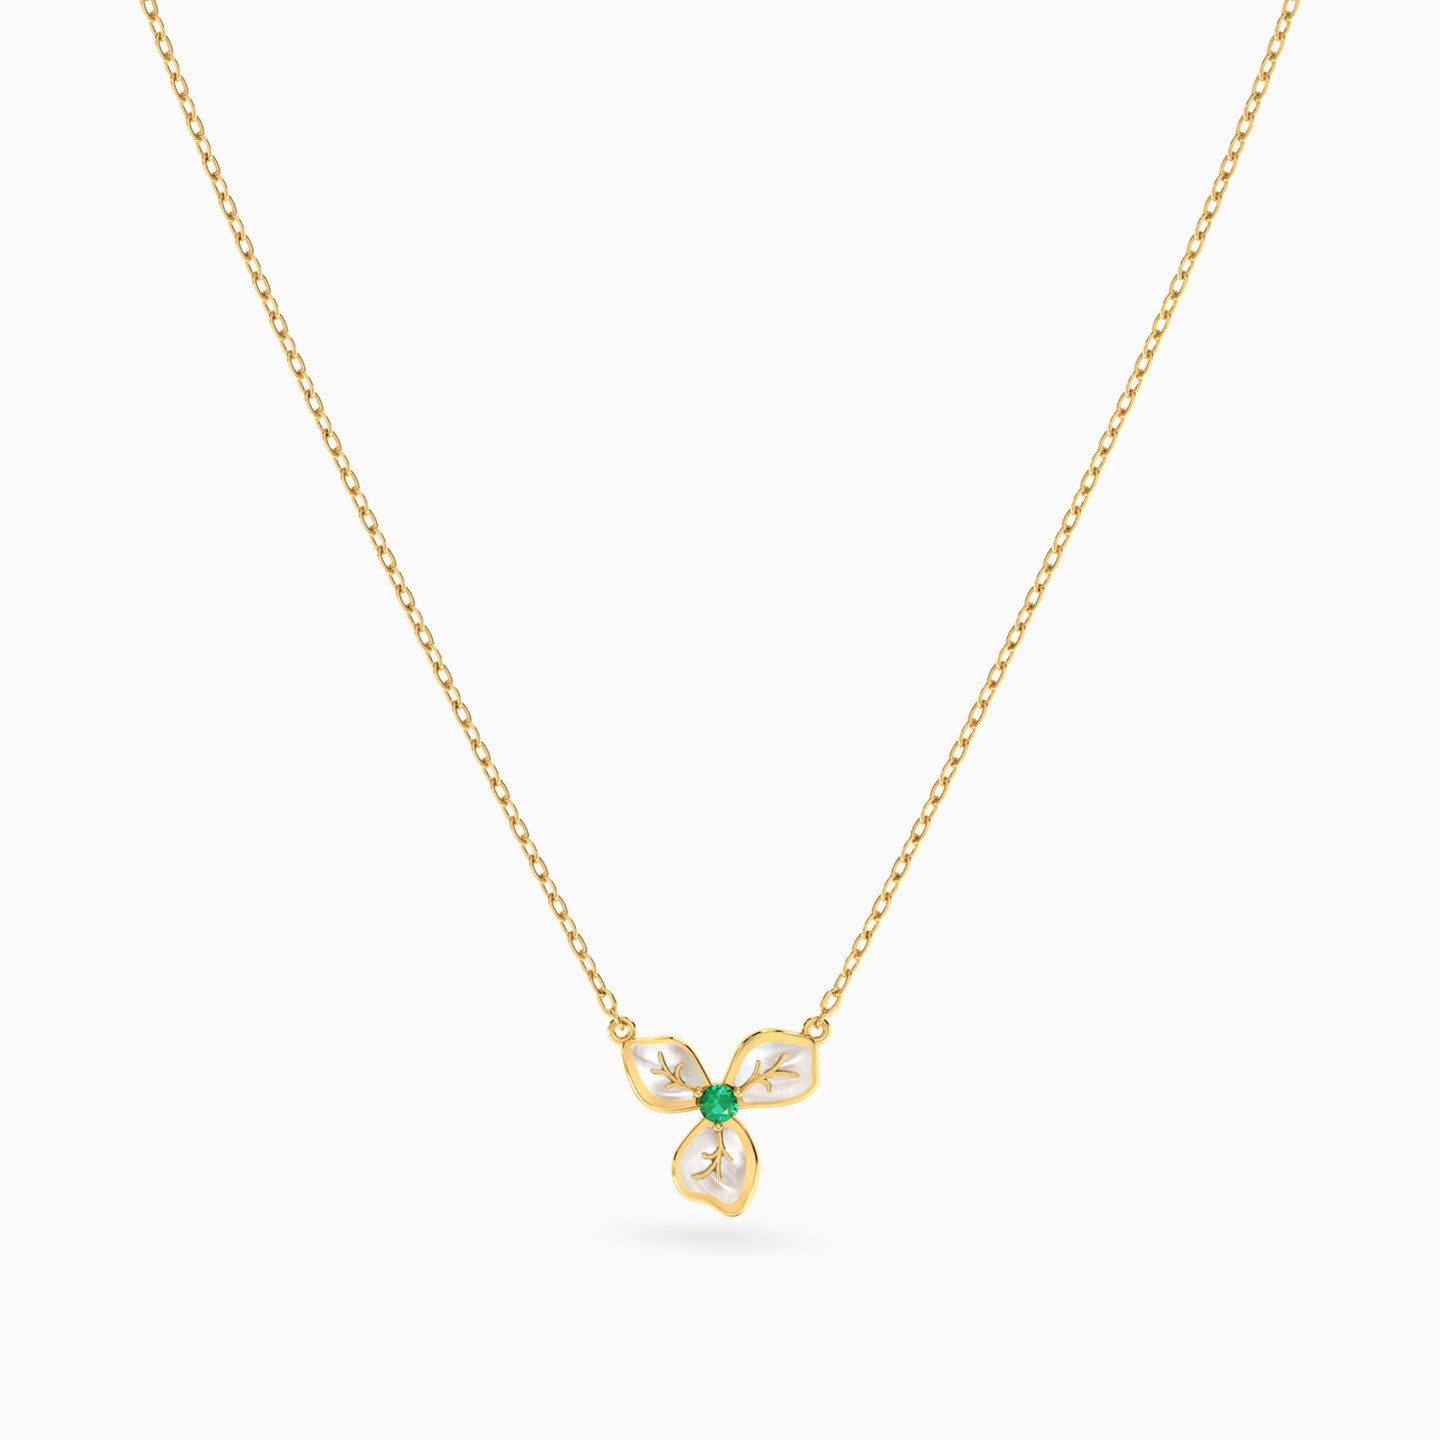 Flower Shaped Colored Stones Pendant with 18K Gold Chain - 3